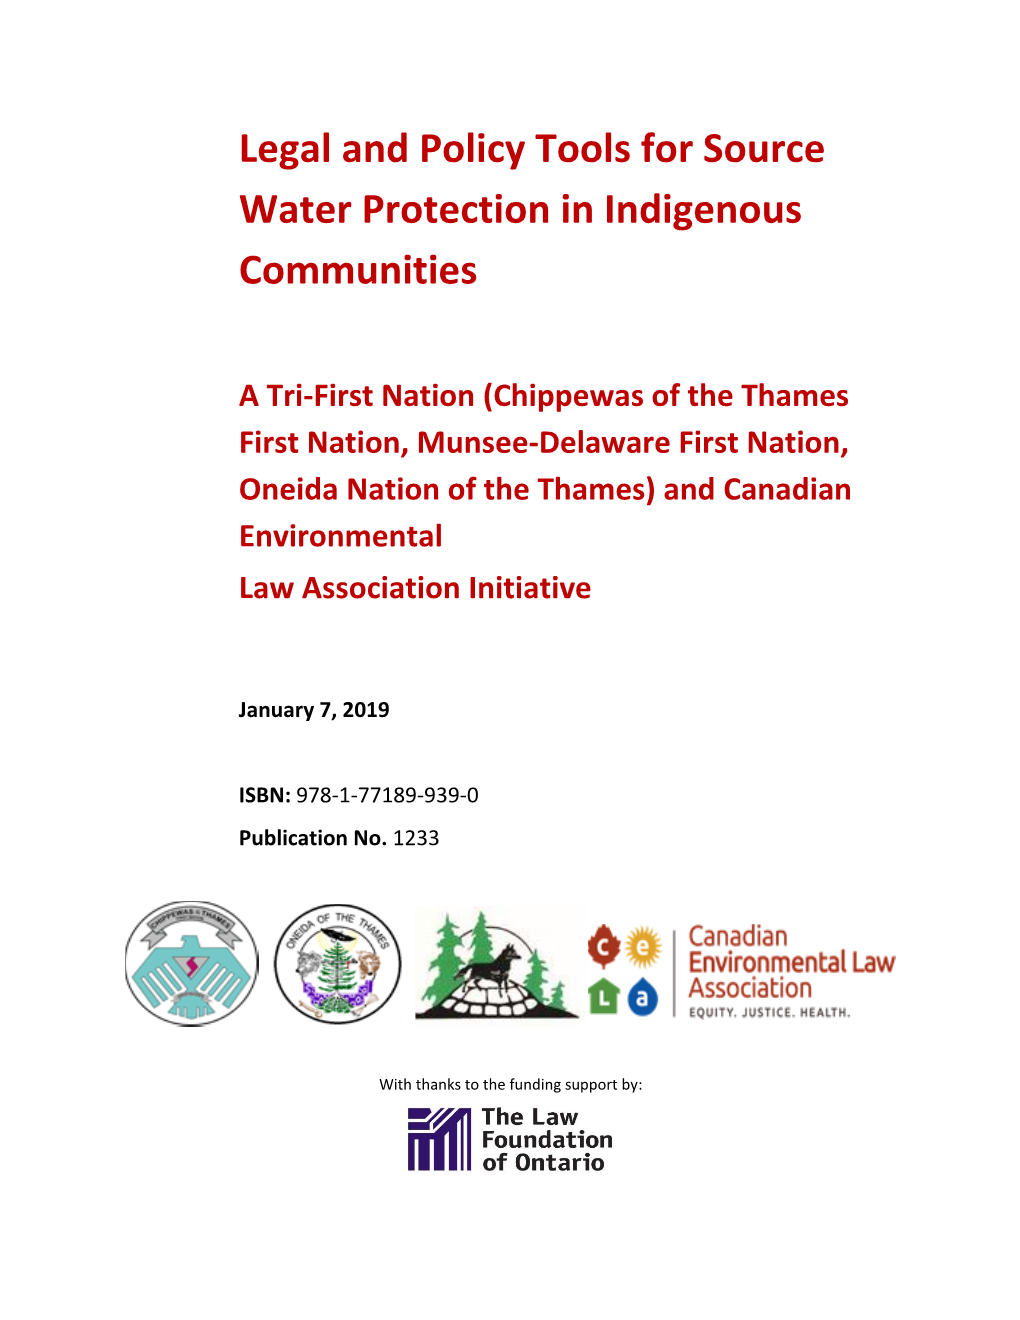 Legal and Policy Tools for Source Water Protection in Indigenous Communities